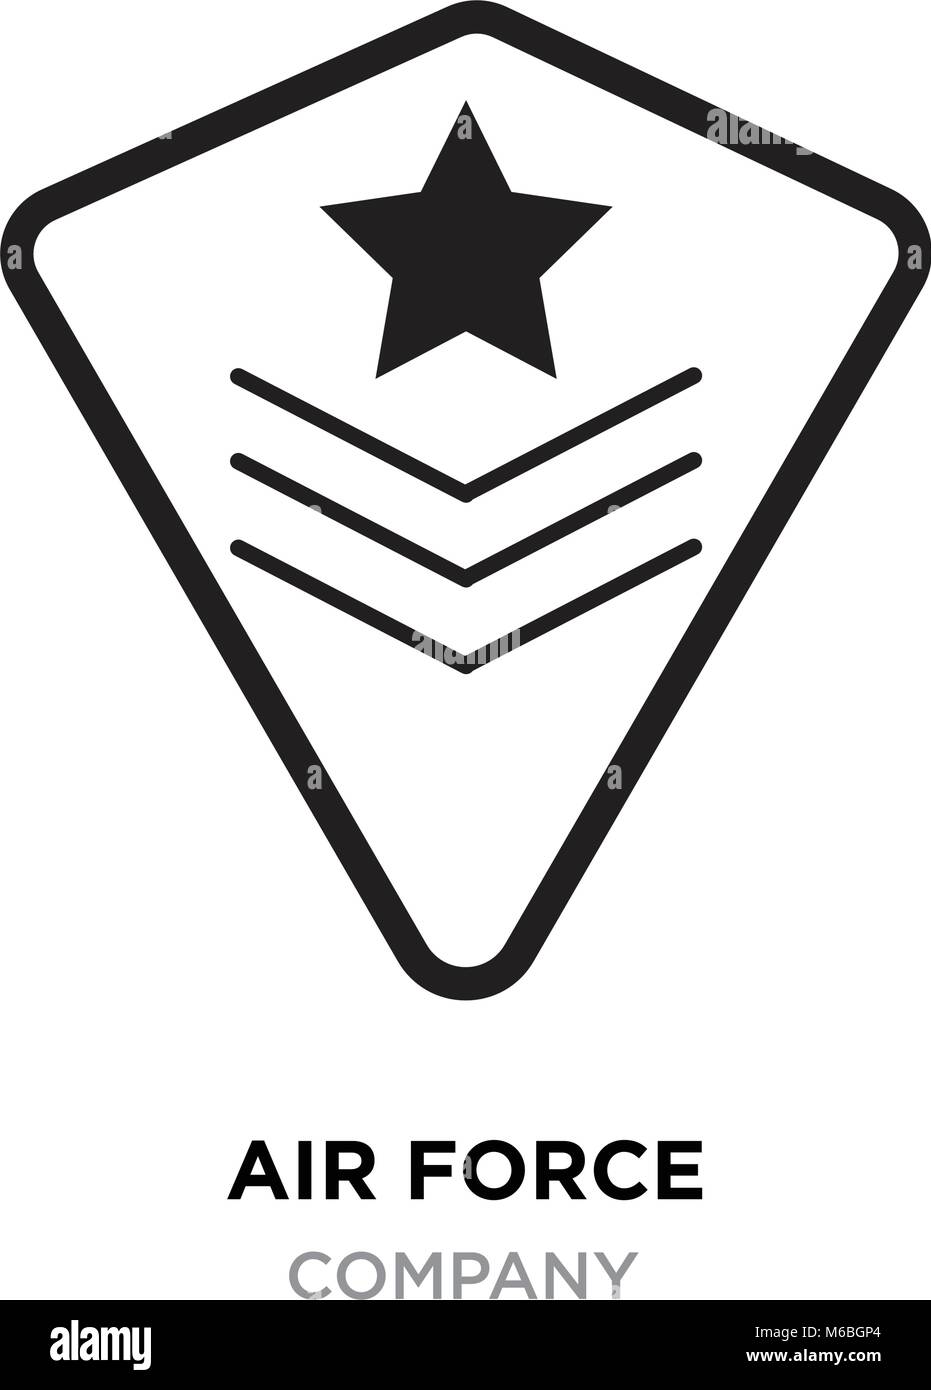 air force logo images, linear Military emblem icon image with stars, vector illustration design Stock Vector